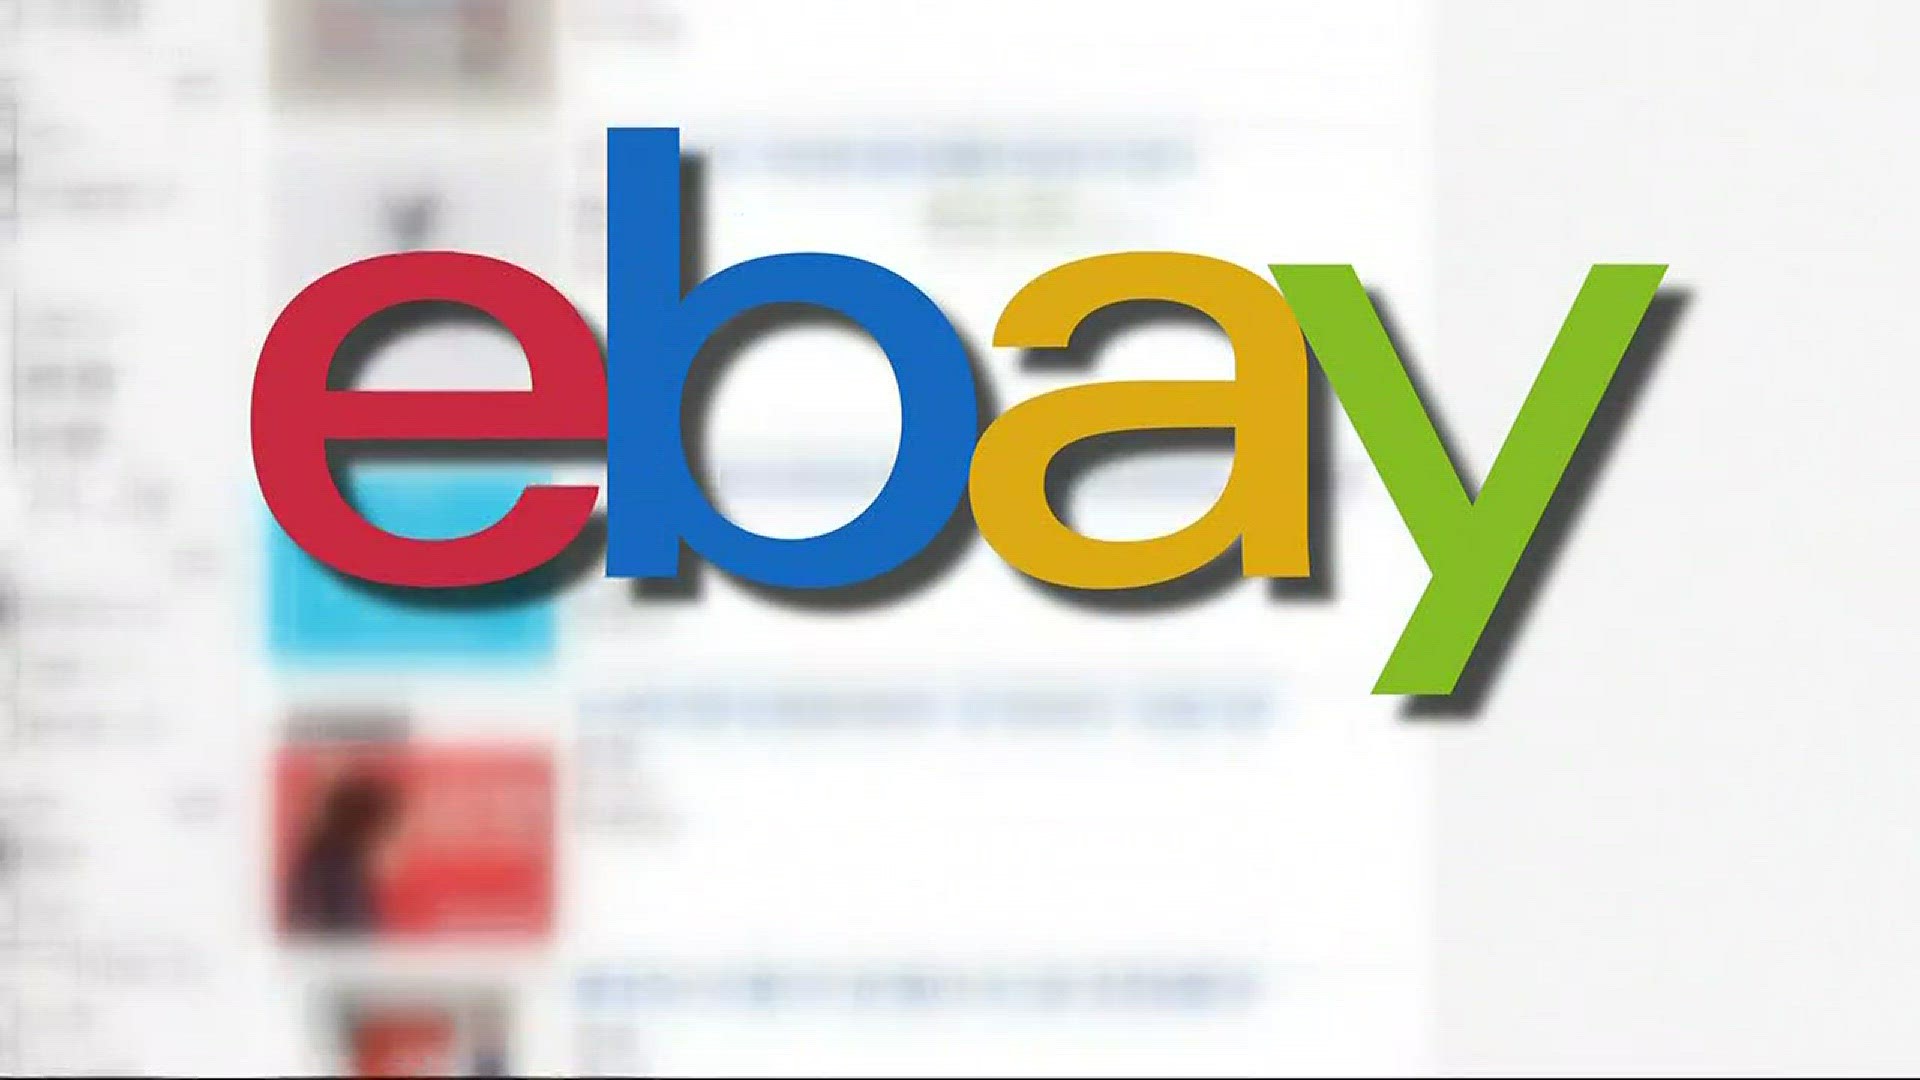 eBay sells big discounts with coupons